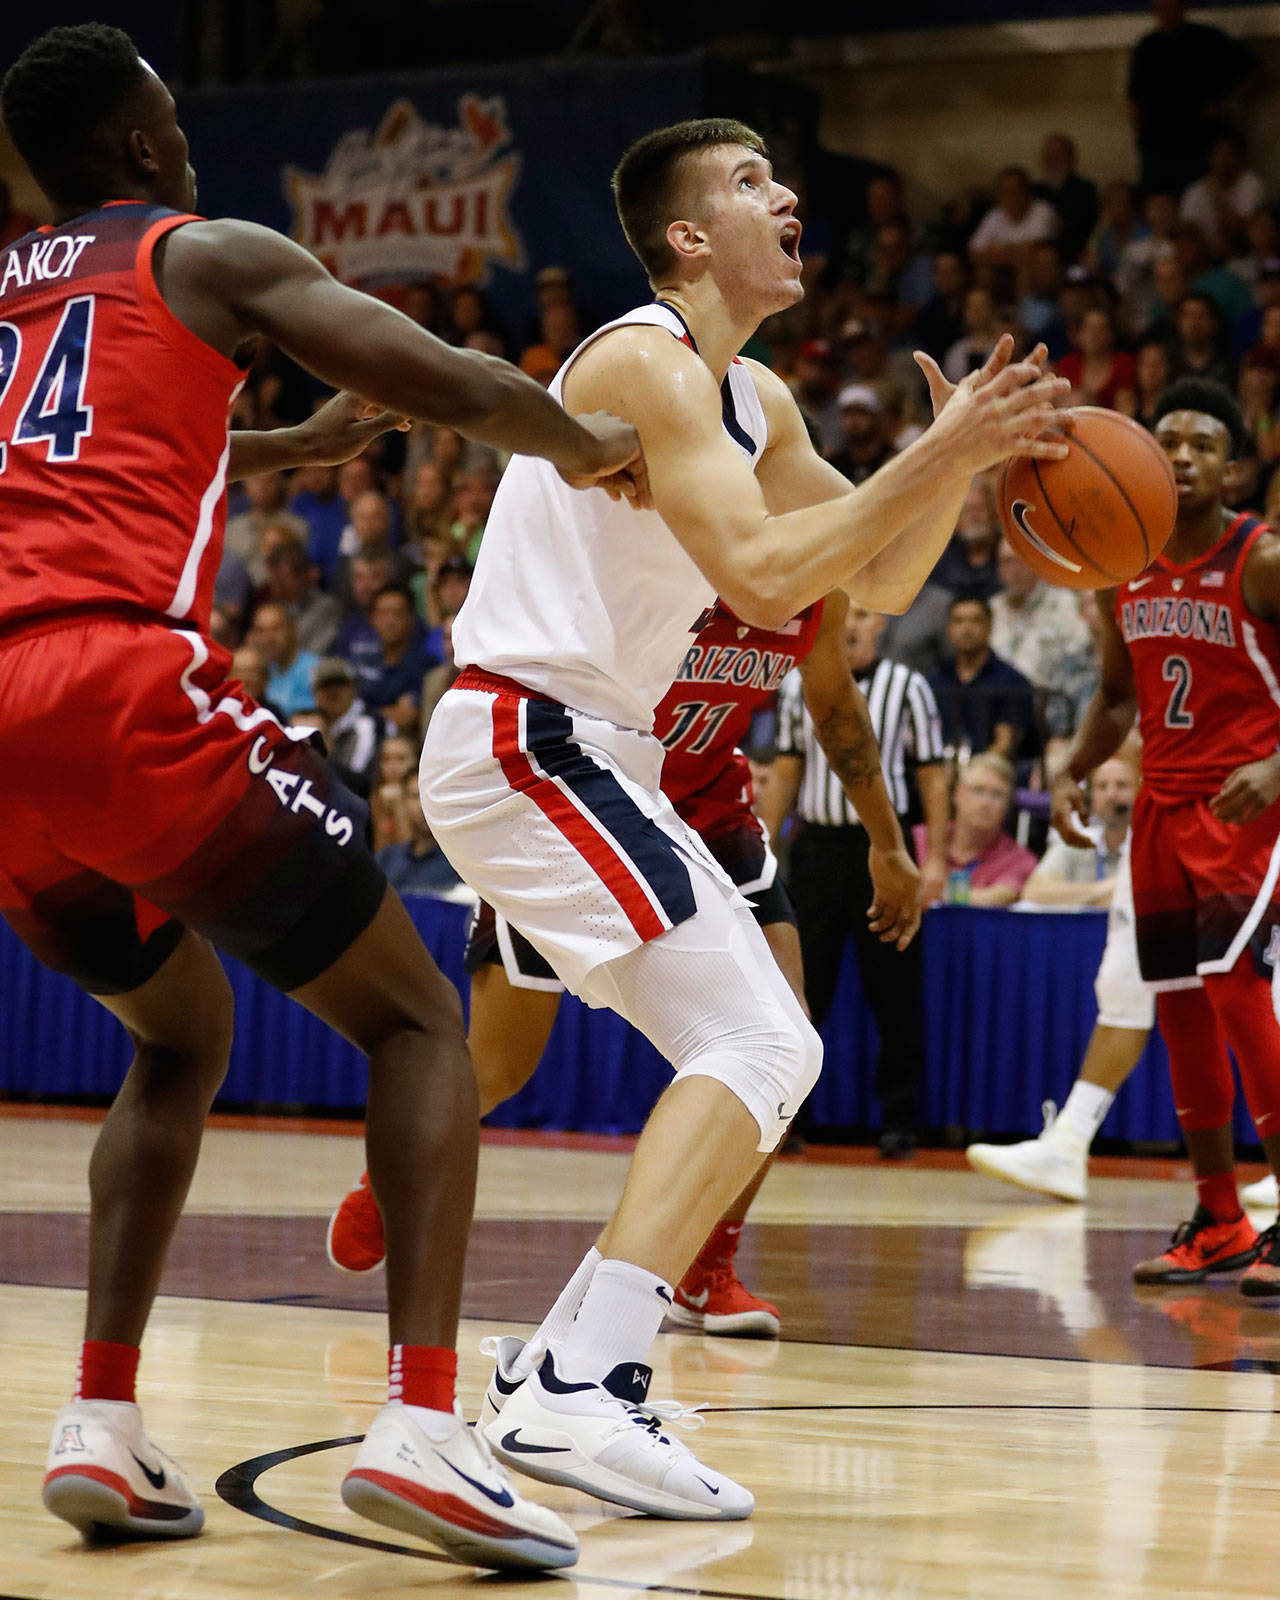 Gonzaga forward Filip Petrusev drops the ball under the basket during the first half of a Tuesday game in Lahaina, Hawaii. (AP Photo/Marco Garcia)